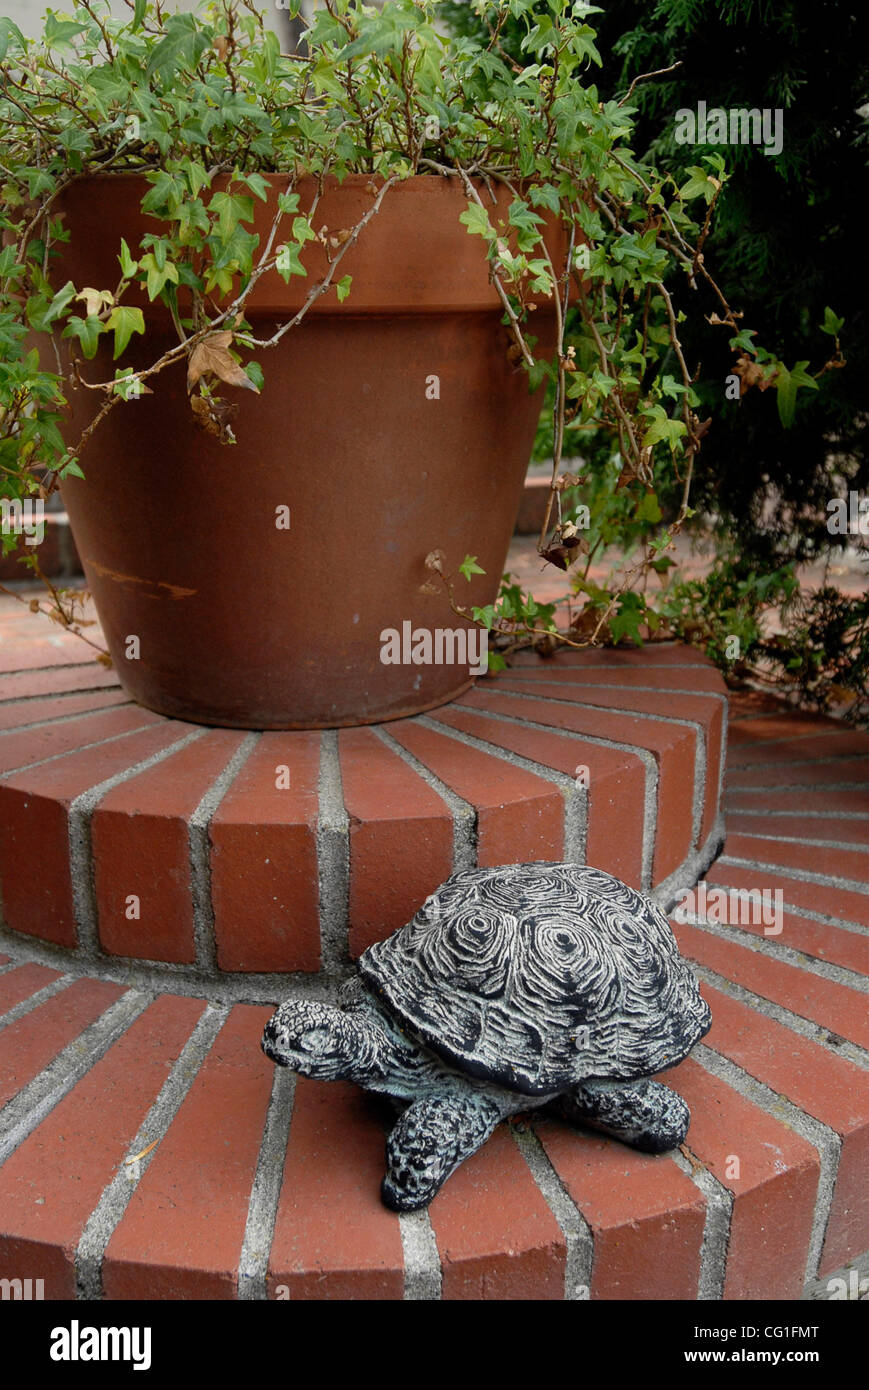 The gardens at Tao House are being restored to look like those of Nobel Prize-winning playwright Eugene O'Neill and his wife Carlotta, in Danville, Calif., on Tuesday, August  7, 2007. This tortoise may have belonged in the original garden. The home's subsequent owners returned it to the National Hi Stock Photo